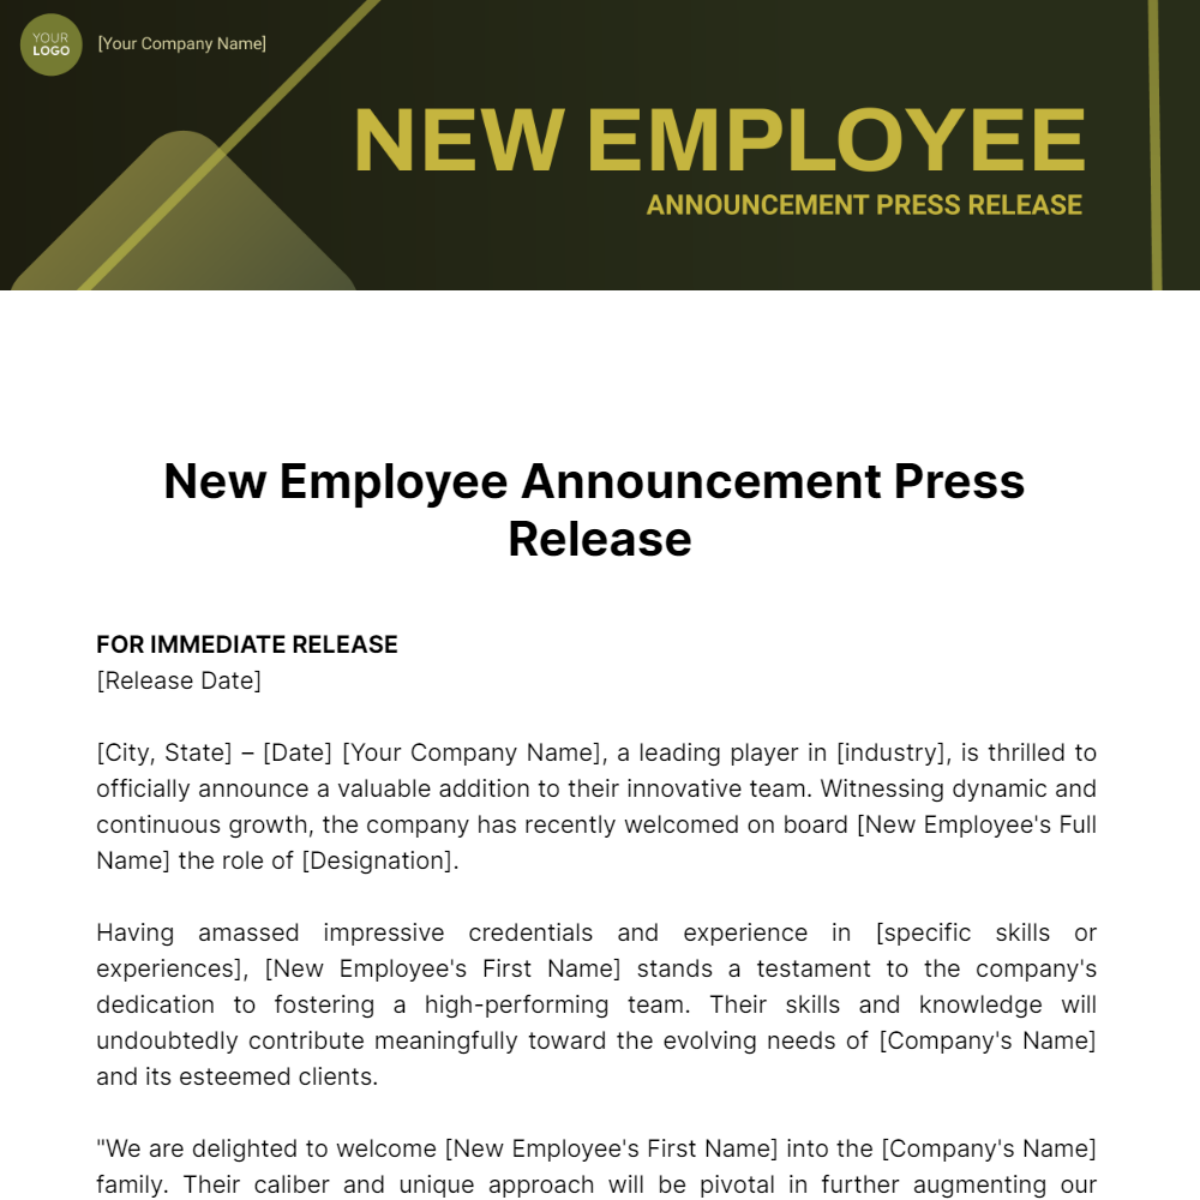 Free New Employee Announcement Press Release Template